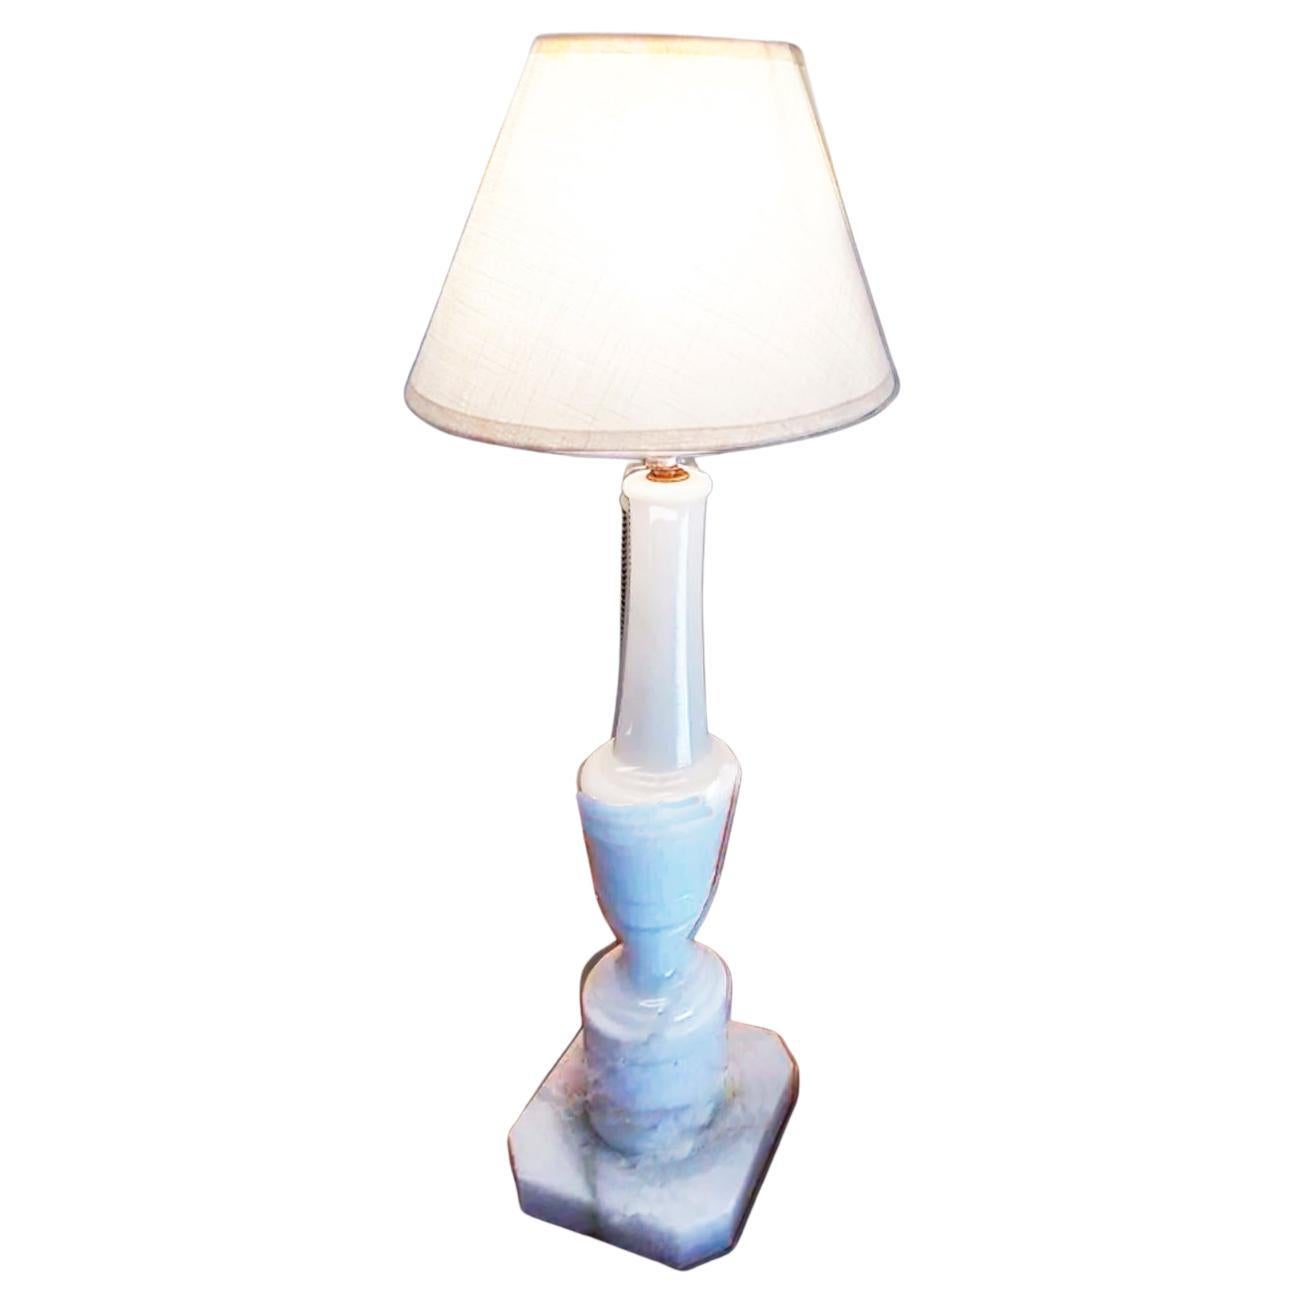 Art Deco Alabaster Table Lamp White Color Spain, 40s-50s For Sale